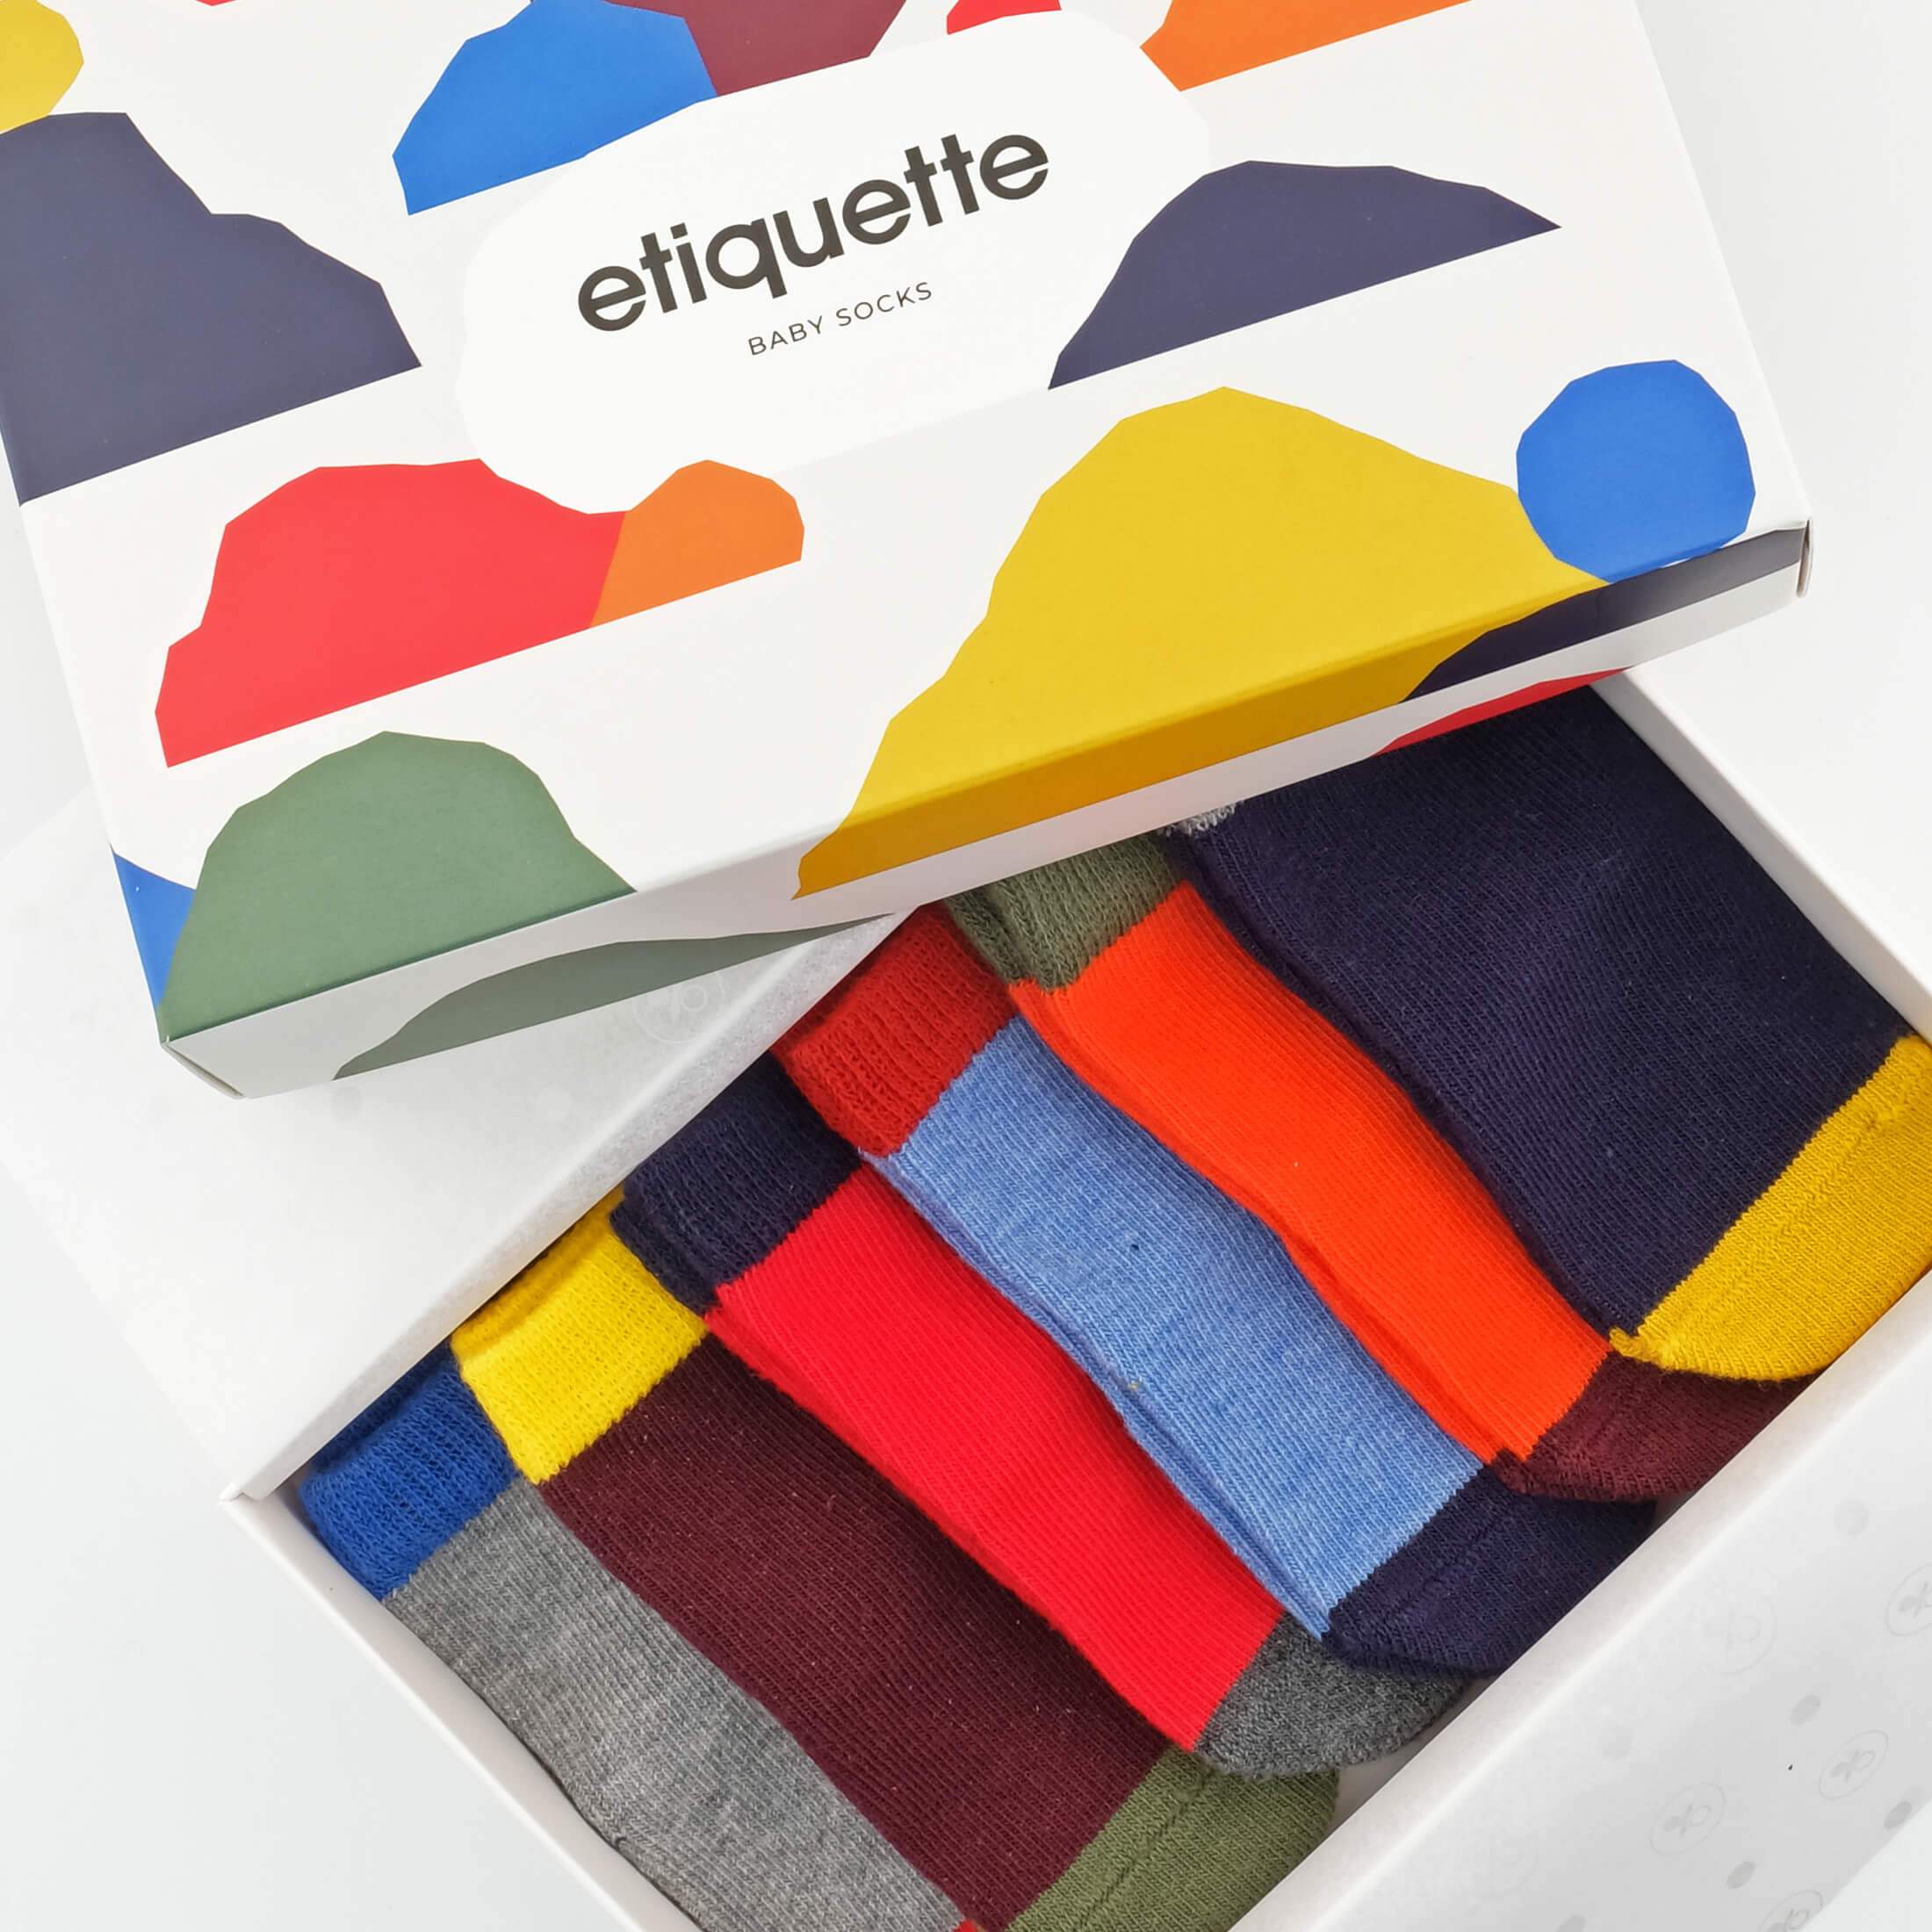 Baby Socks - Solid As A Rock Baby Socks Gift Box - Color Block Baby Socks - box top view⎪Lil'Etiquette Clothiers